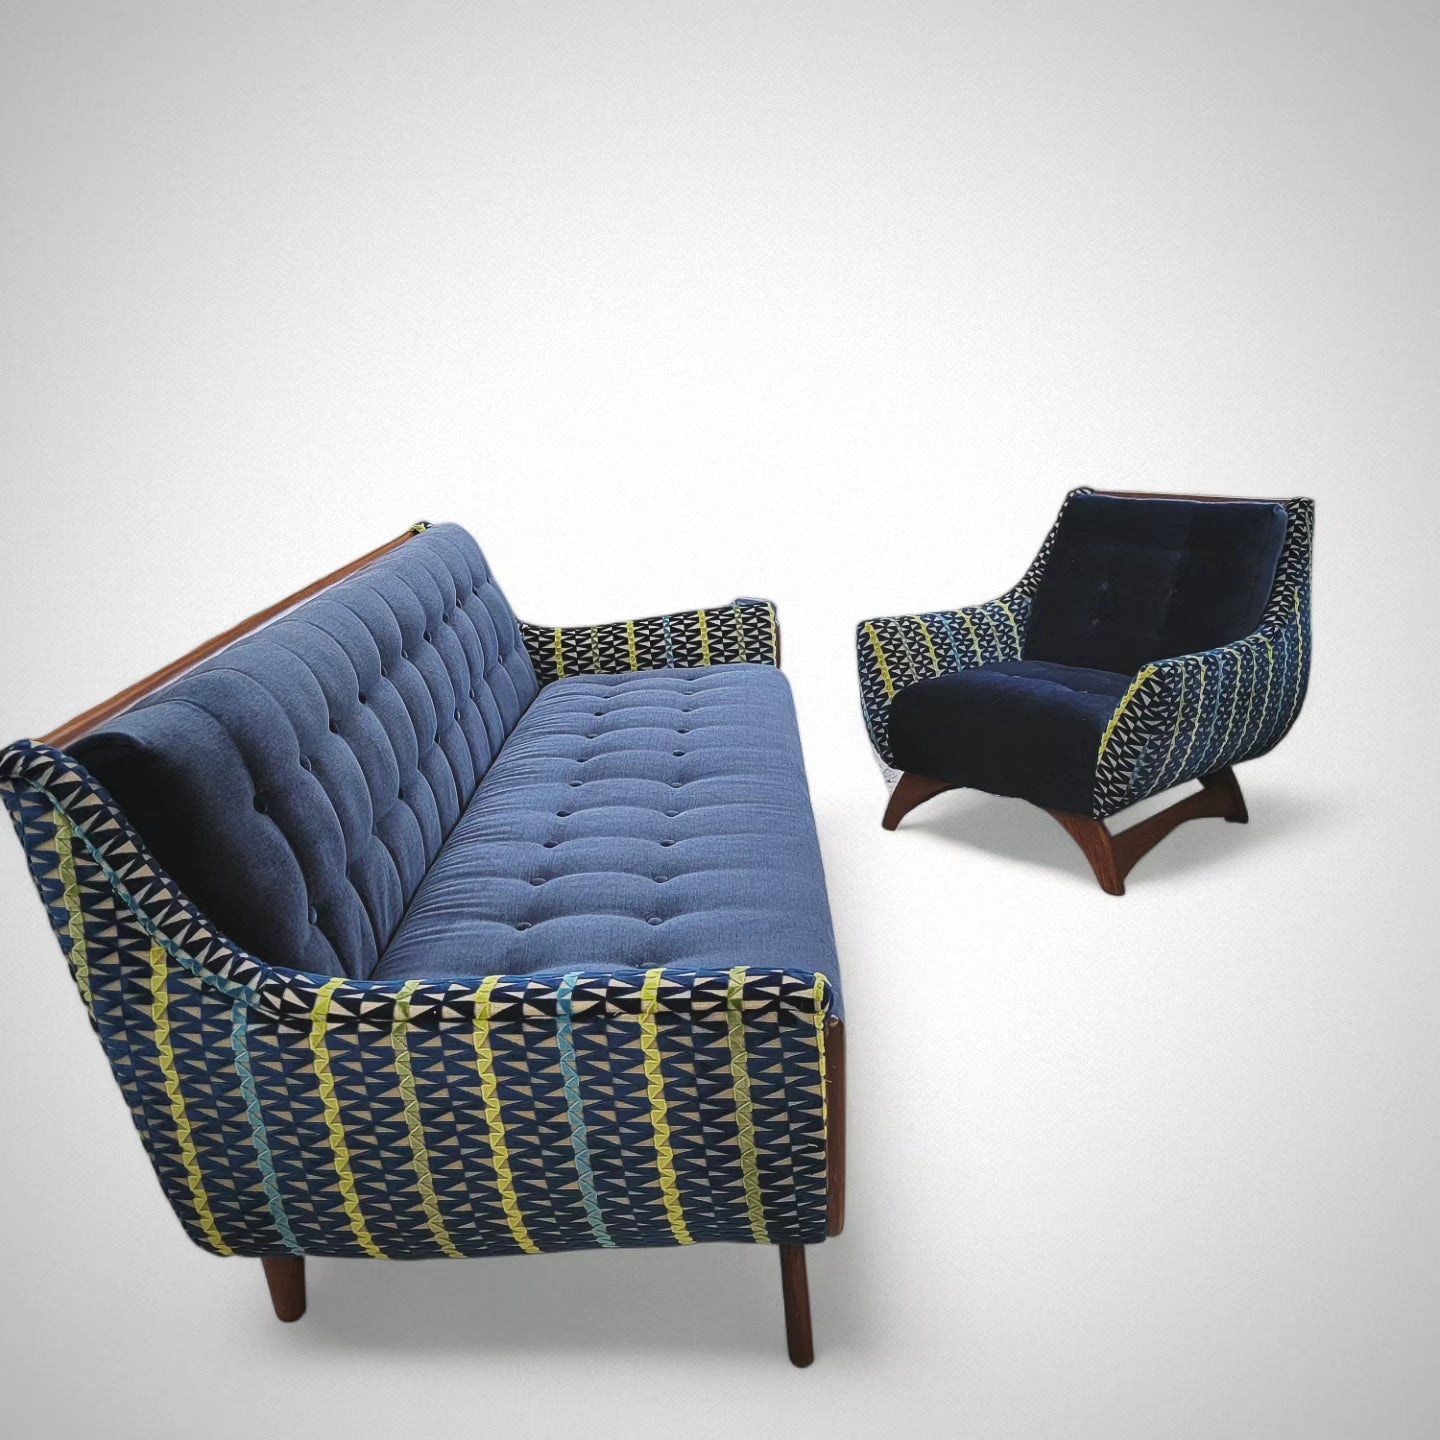 Mid Century Modern Adrian Pearsall Gondola Sofa and Adrian Pearsall Lounge Chair Newly Upholstered - 2 Piece Set